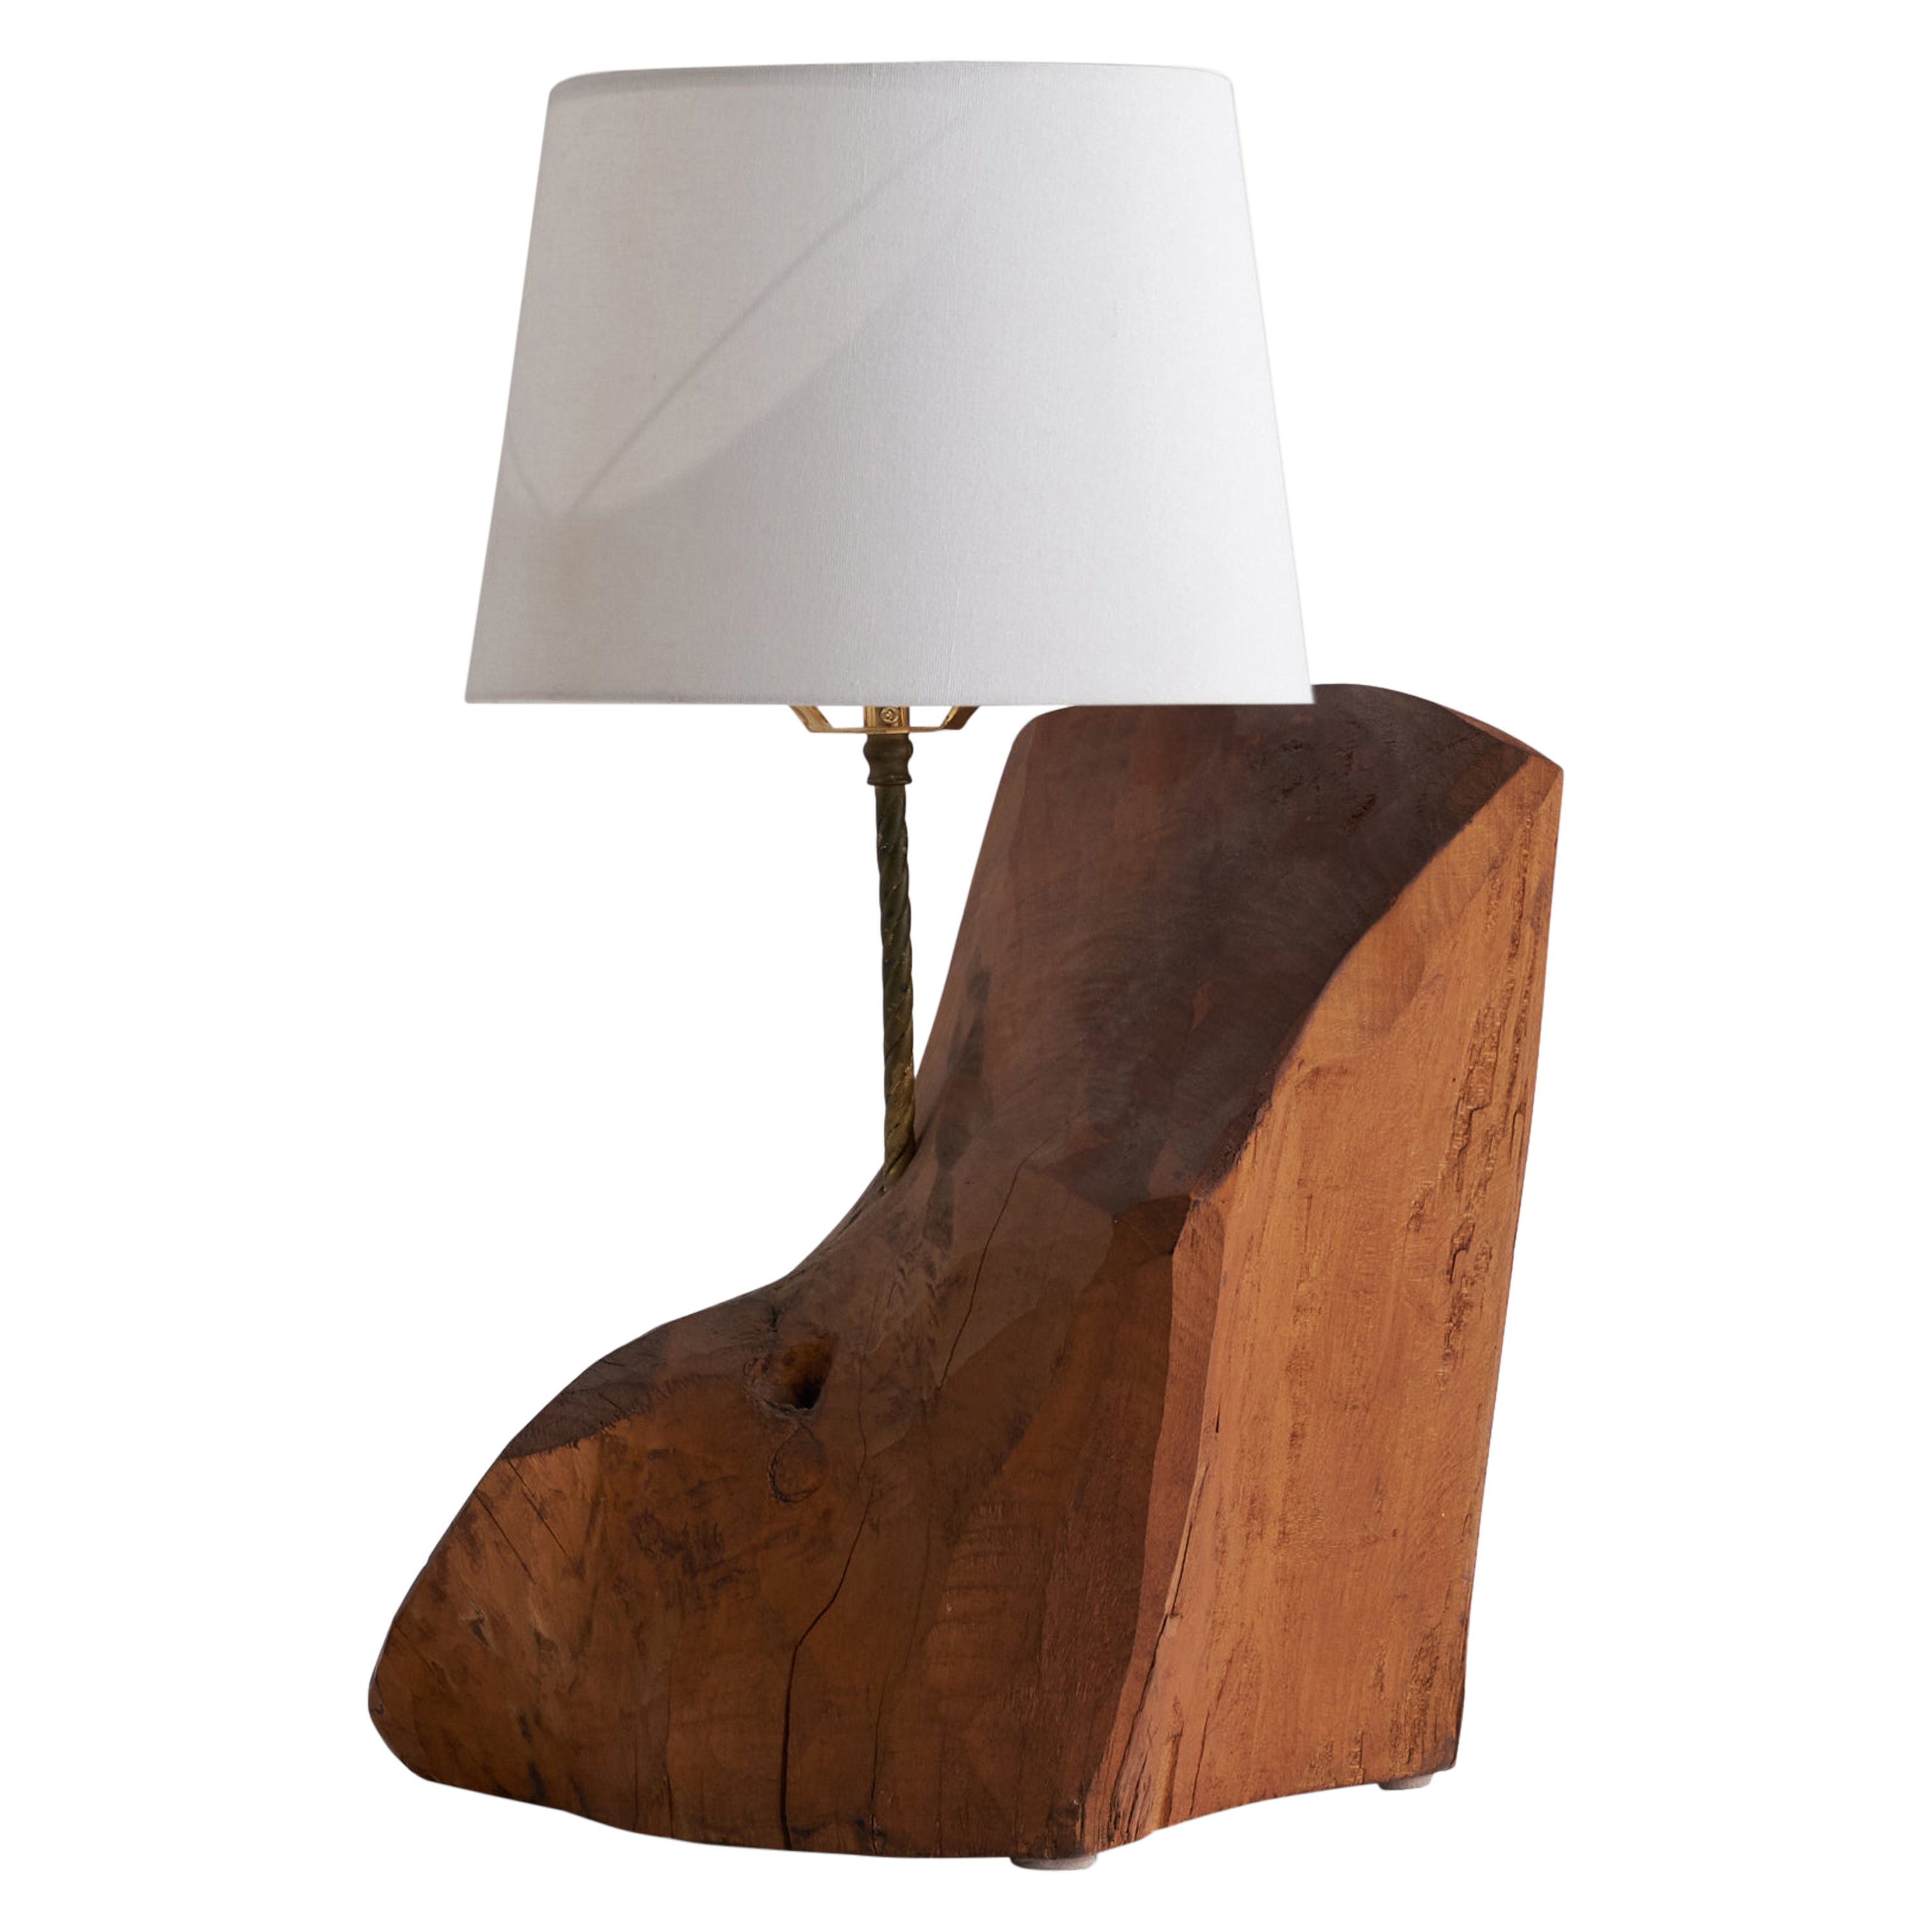 American Designer, Large Freeform Table Lamp, Wood, Brass, USA, 1950s For Sale